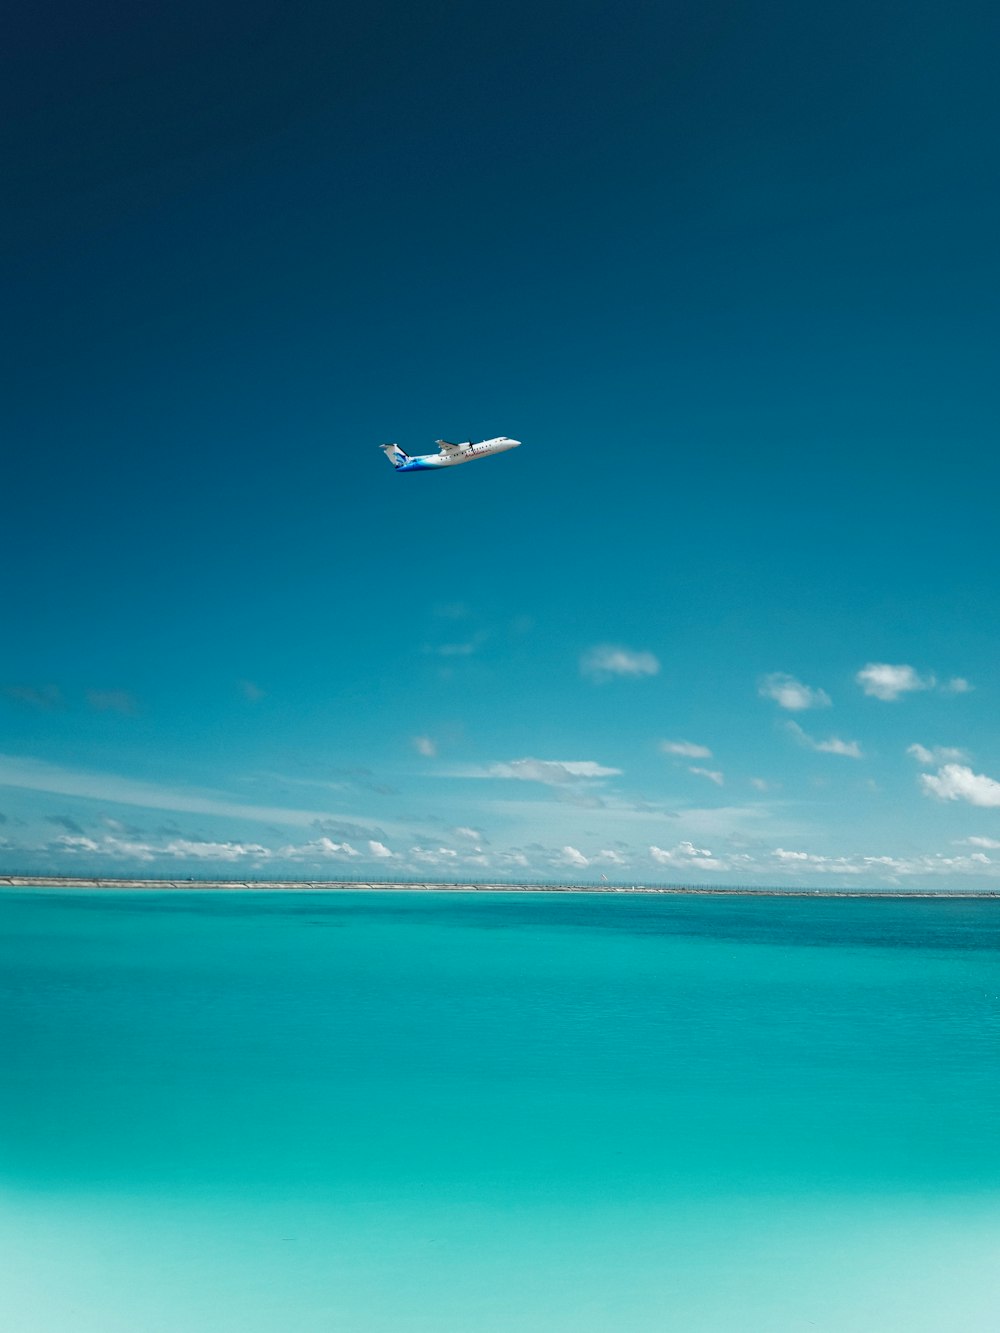 photo of airplane over body of water